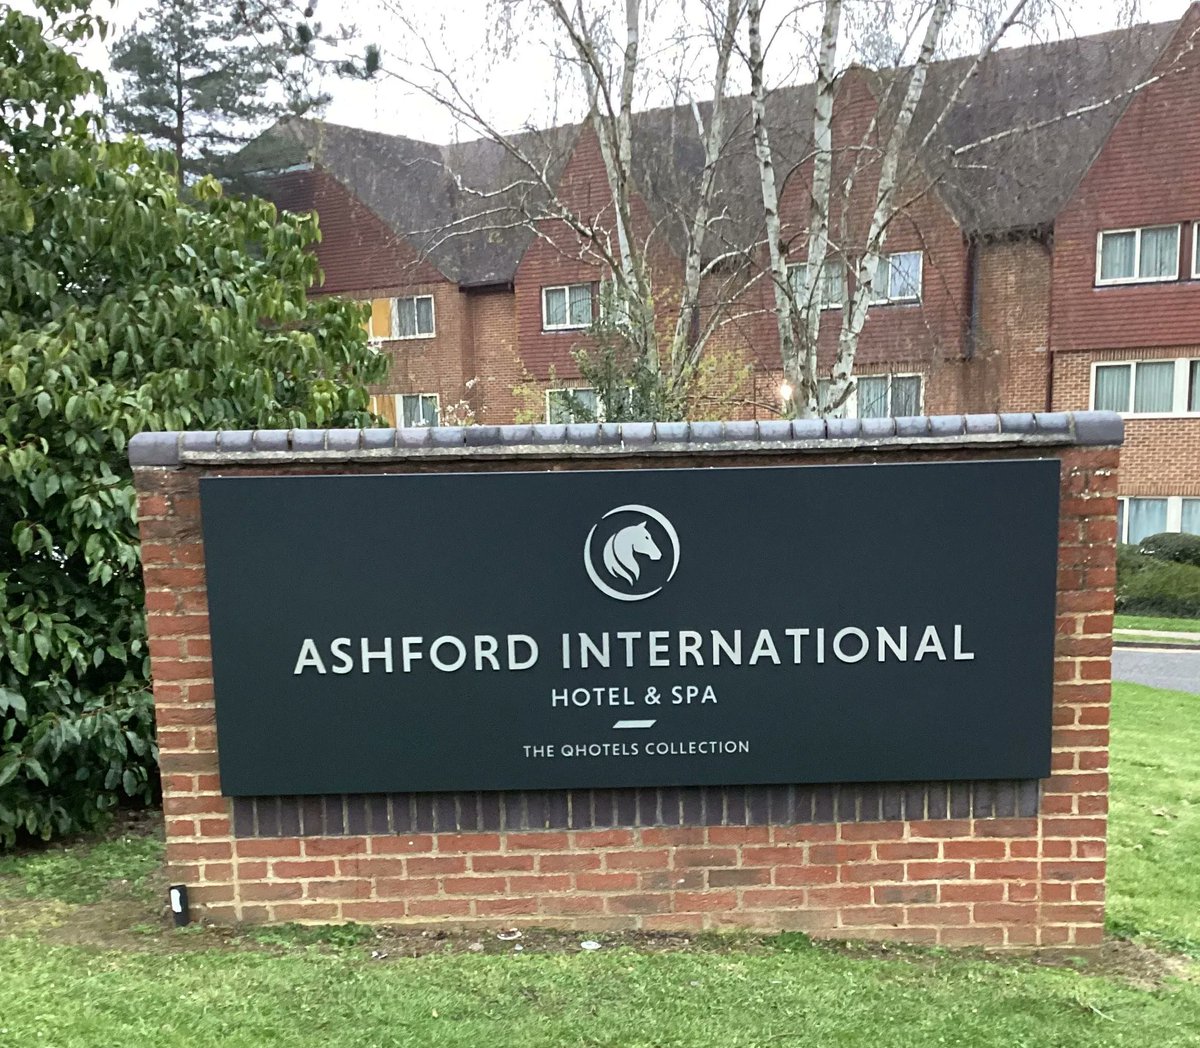 Our #ThursdayThanks go to the excellent Q Hotels team in Ashford, Kent that supported us whilst we rebrandied their Ashford International hotel.
#hotels #signs #branding #rebranding